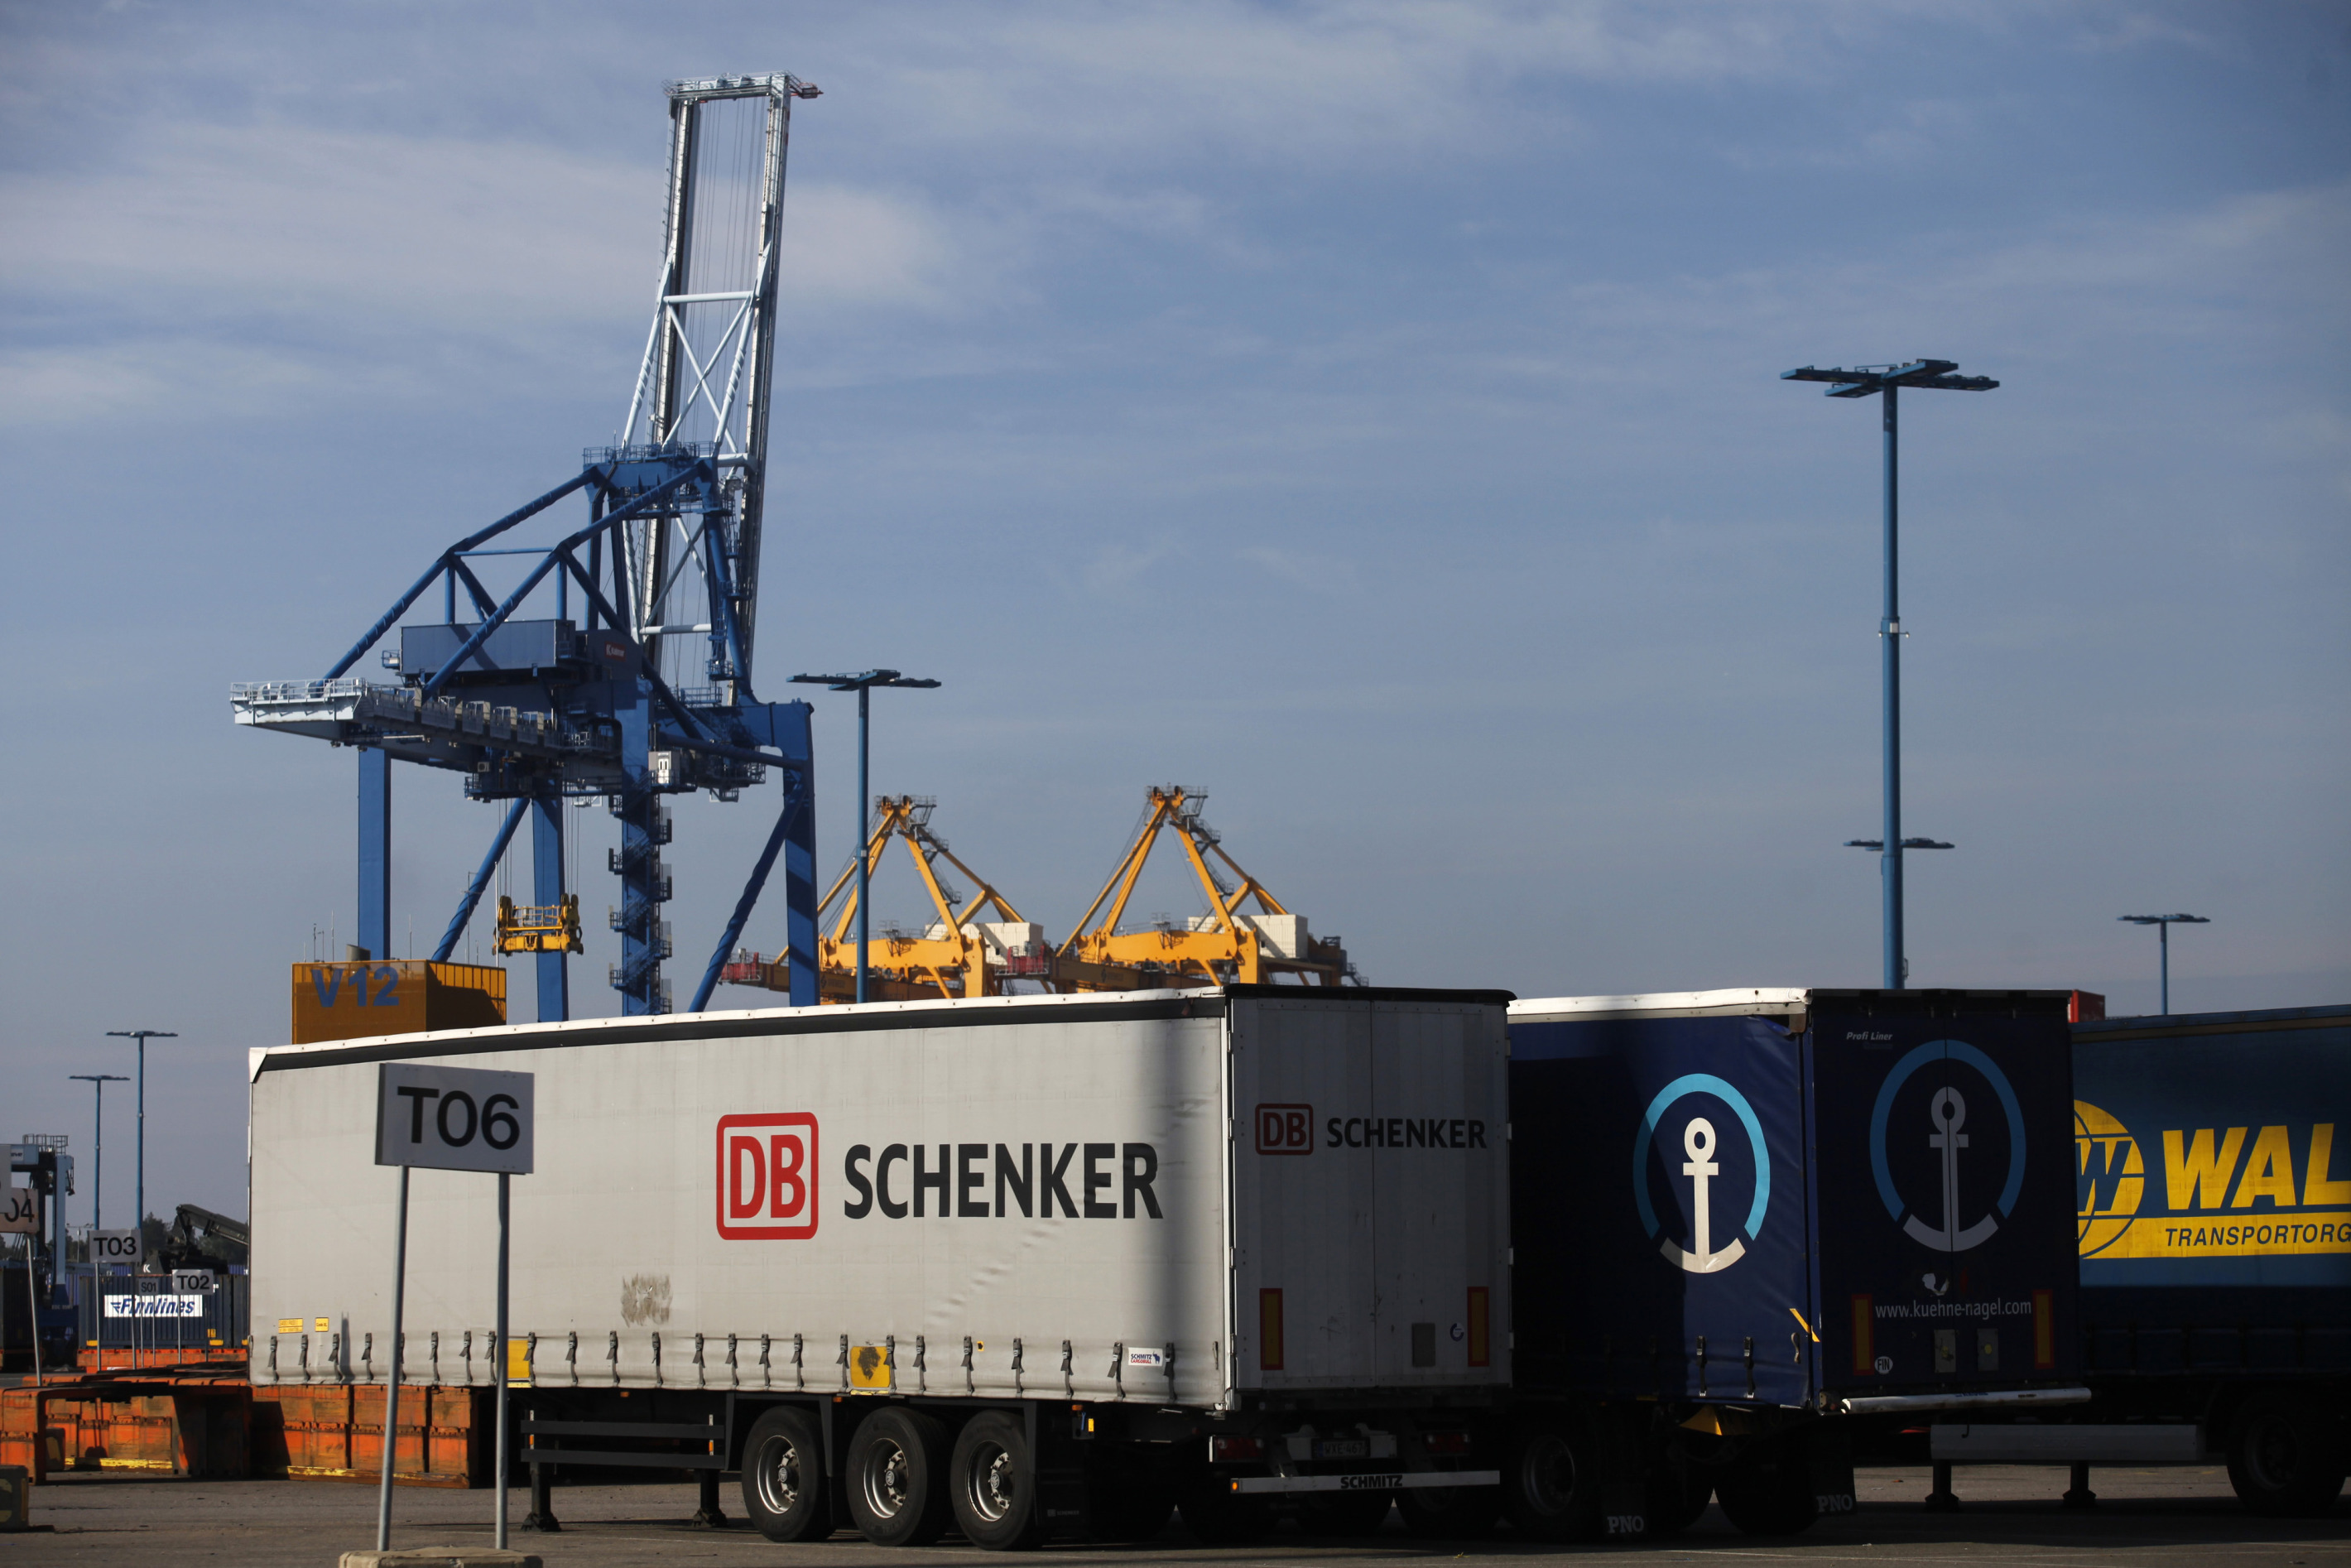 A freight truck operated by DB Schenker&nbsp;at the Port of Helsinki in Helsinki, Finland.